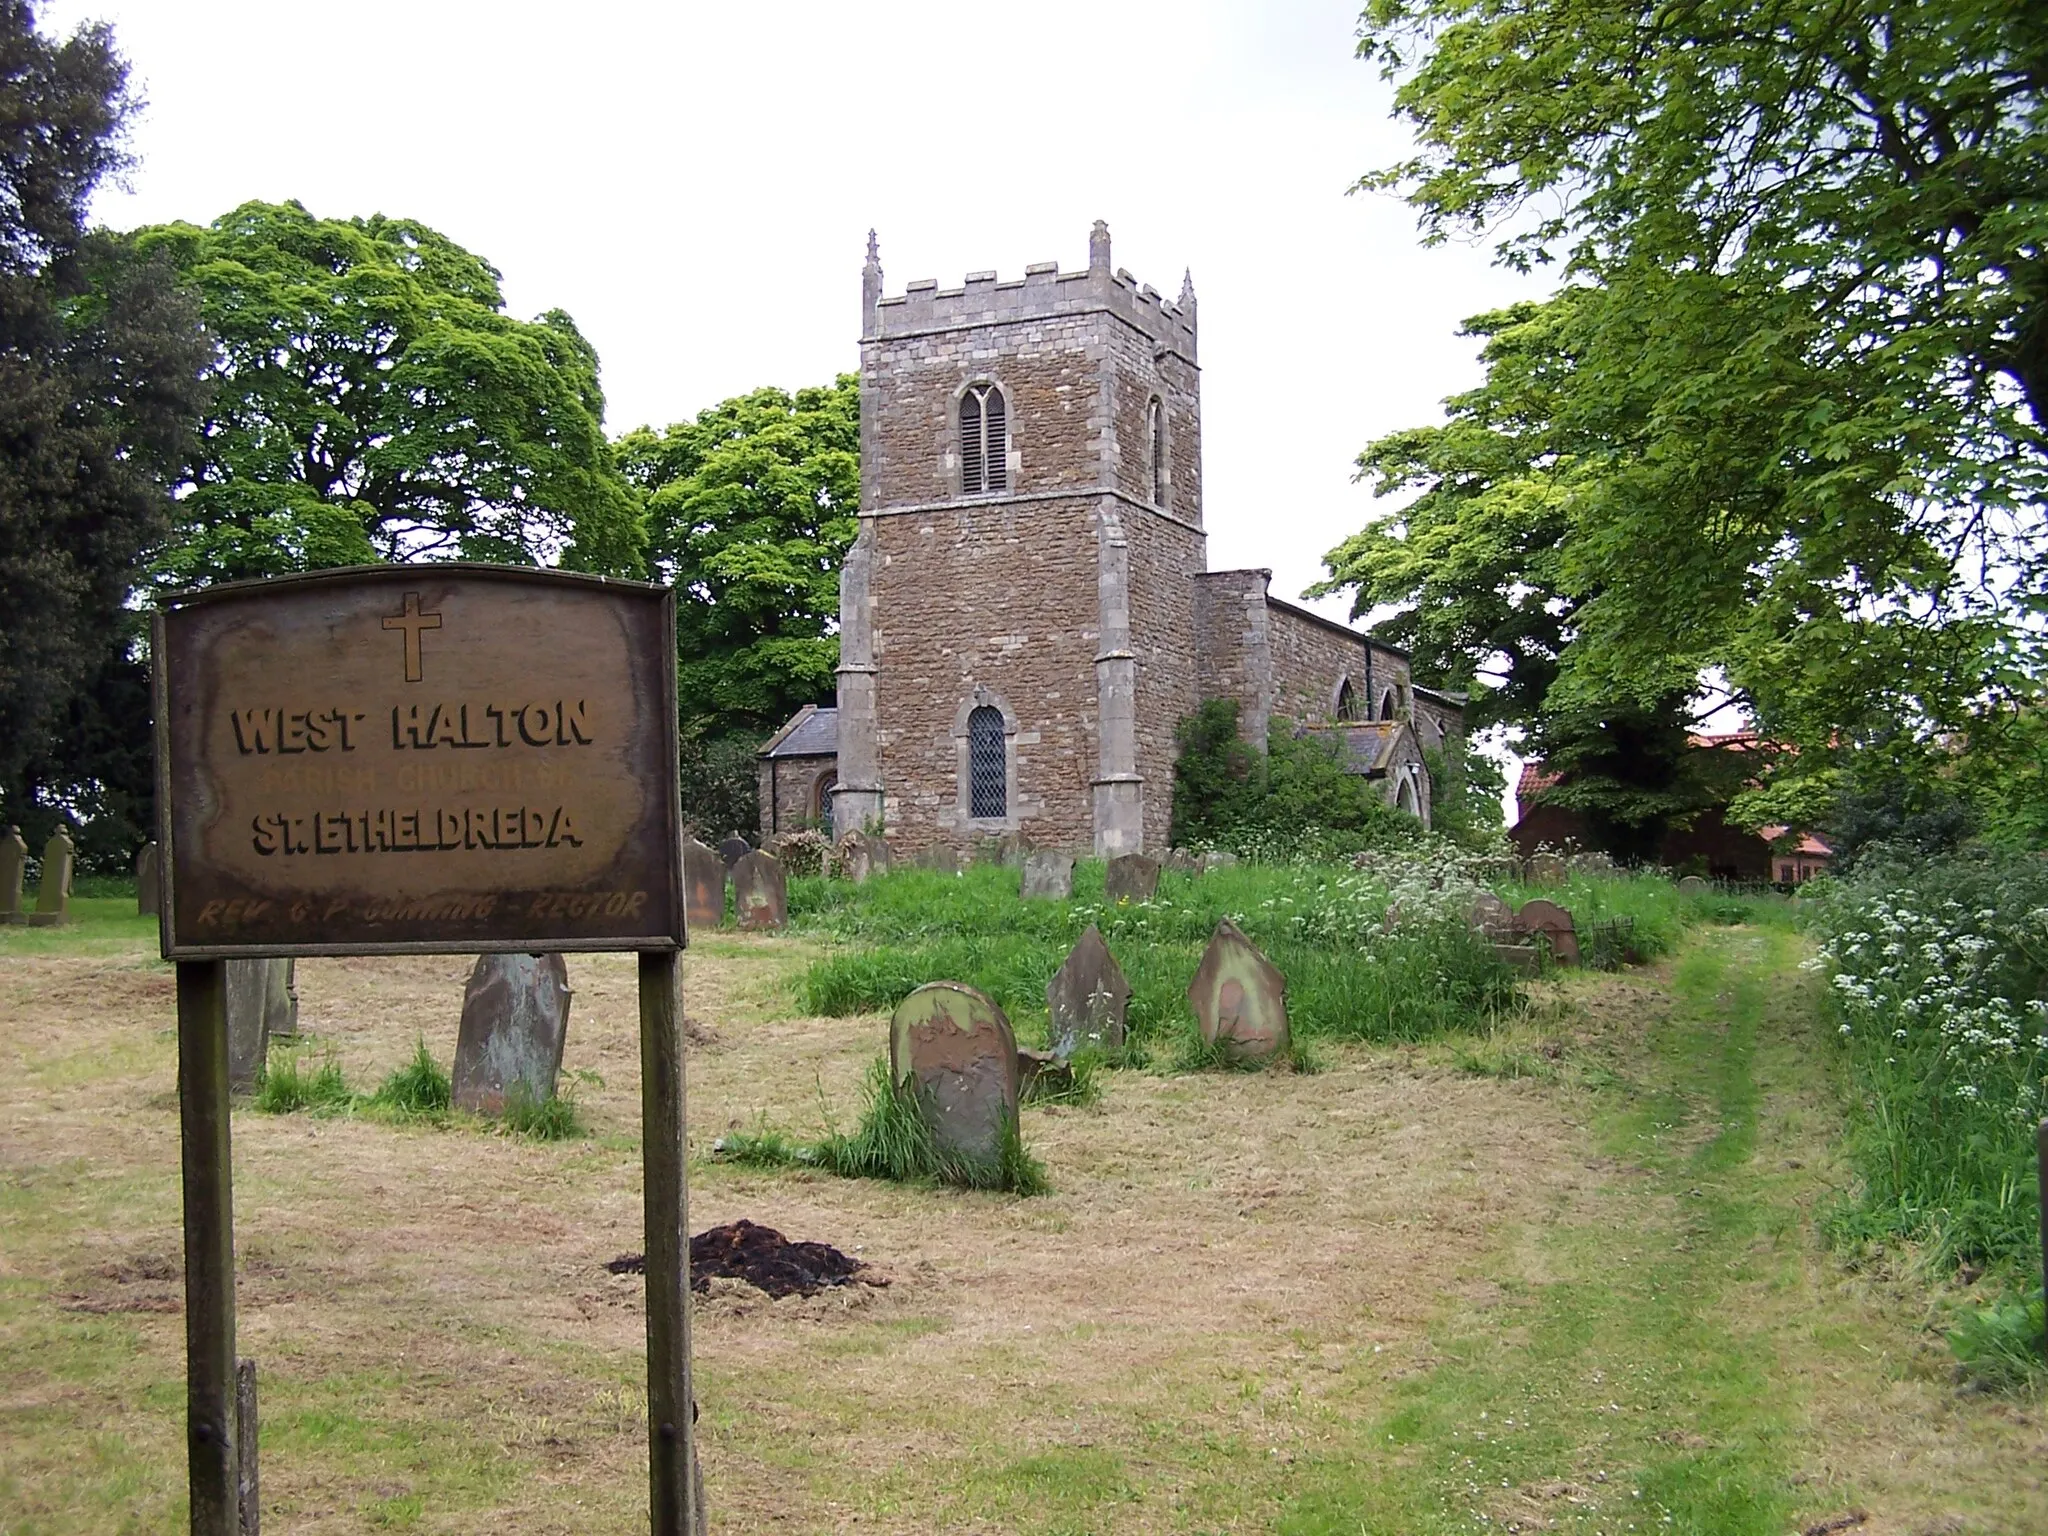 Photo showing: The West Halton parish church of St.Etheldreda was built in 1695 after the destruction of an earlier building in a fire in 1692.